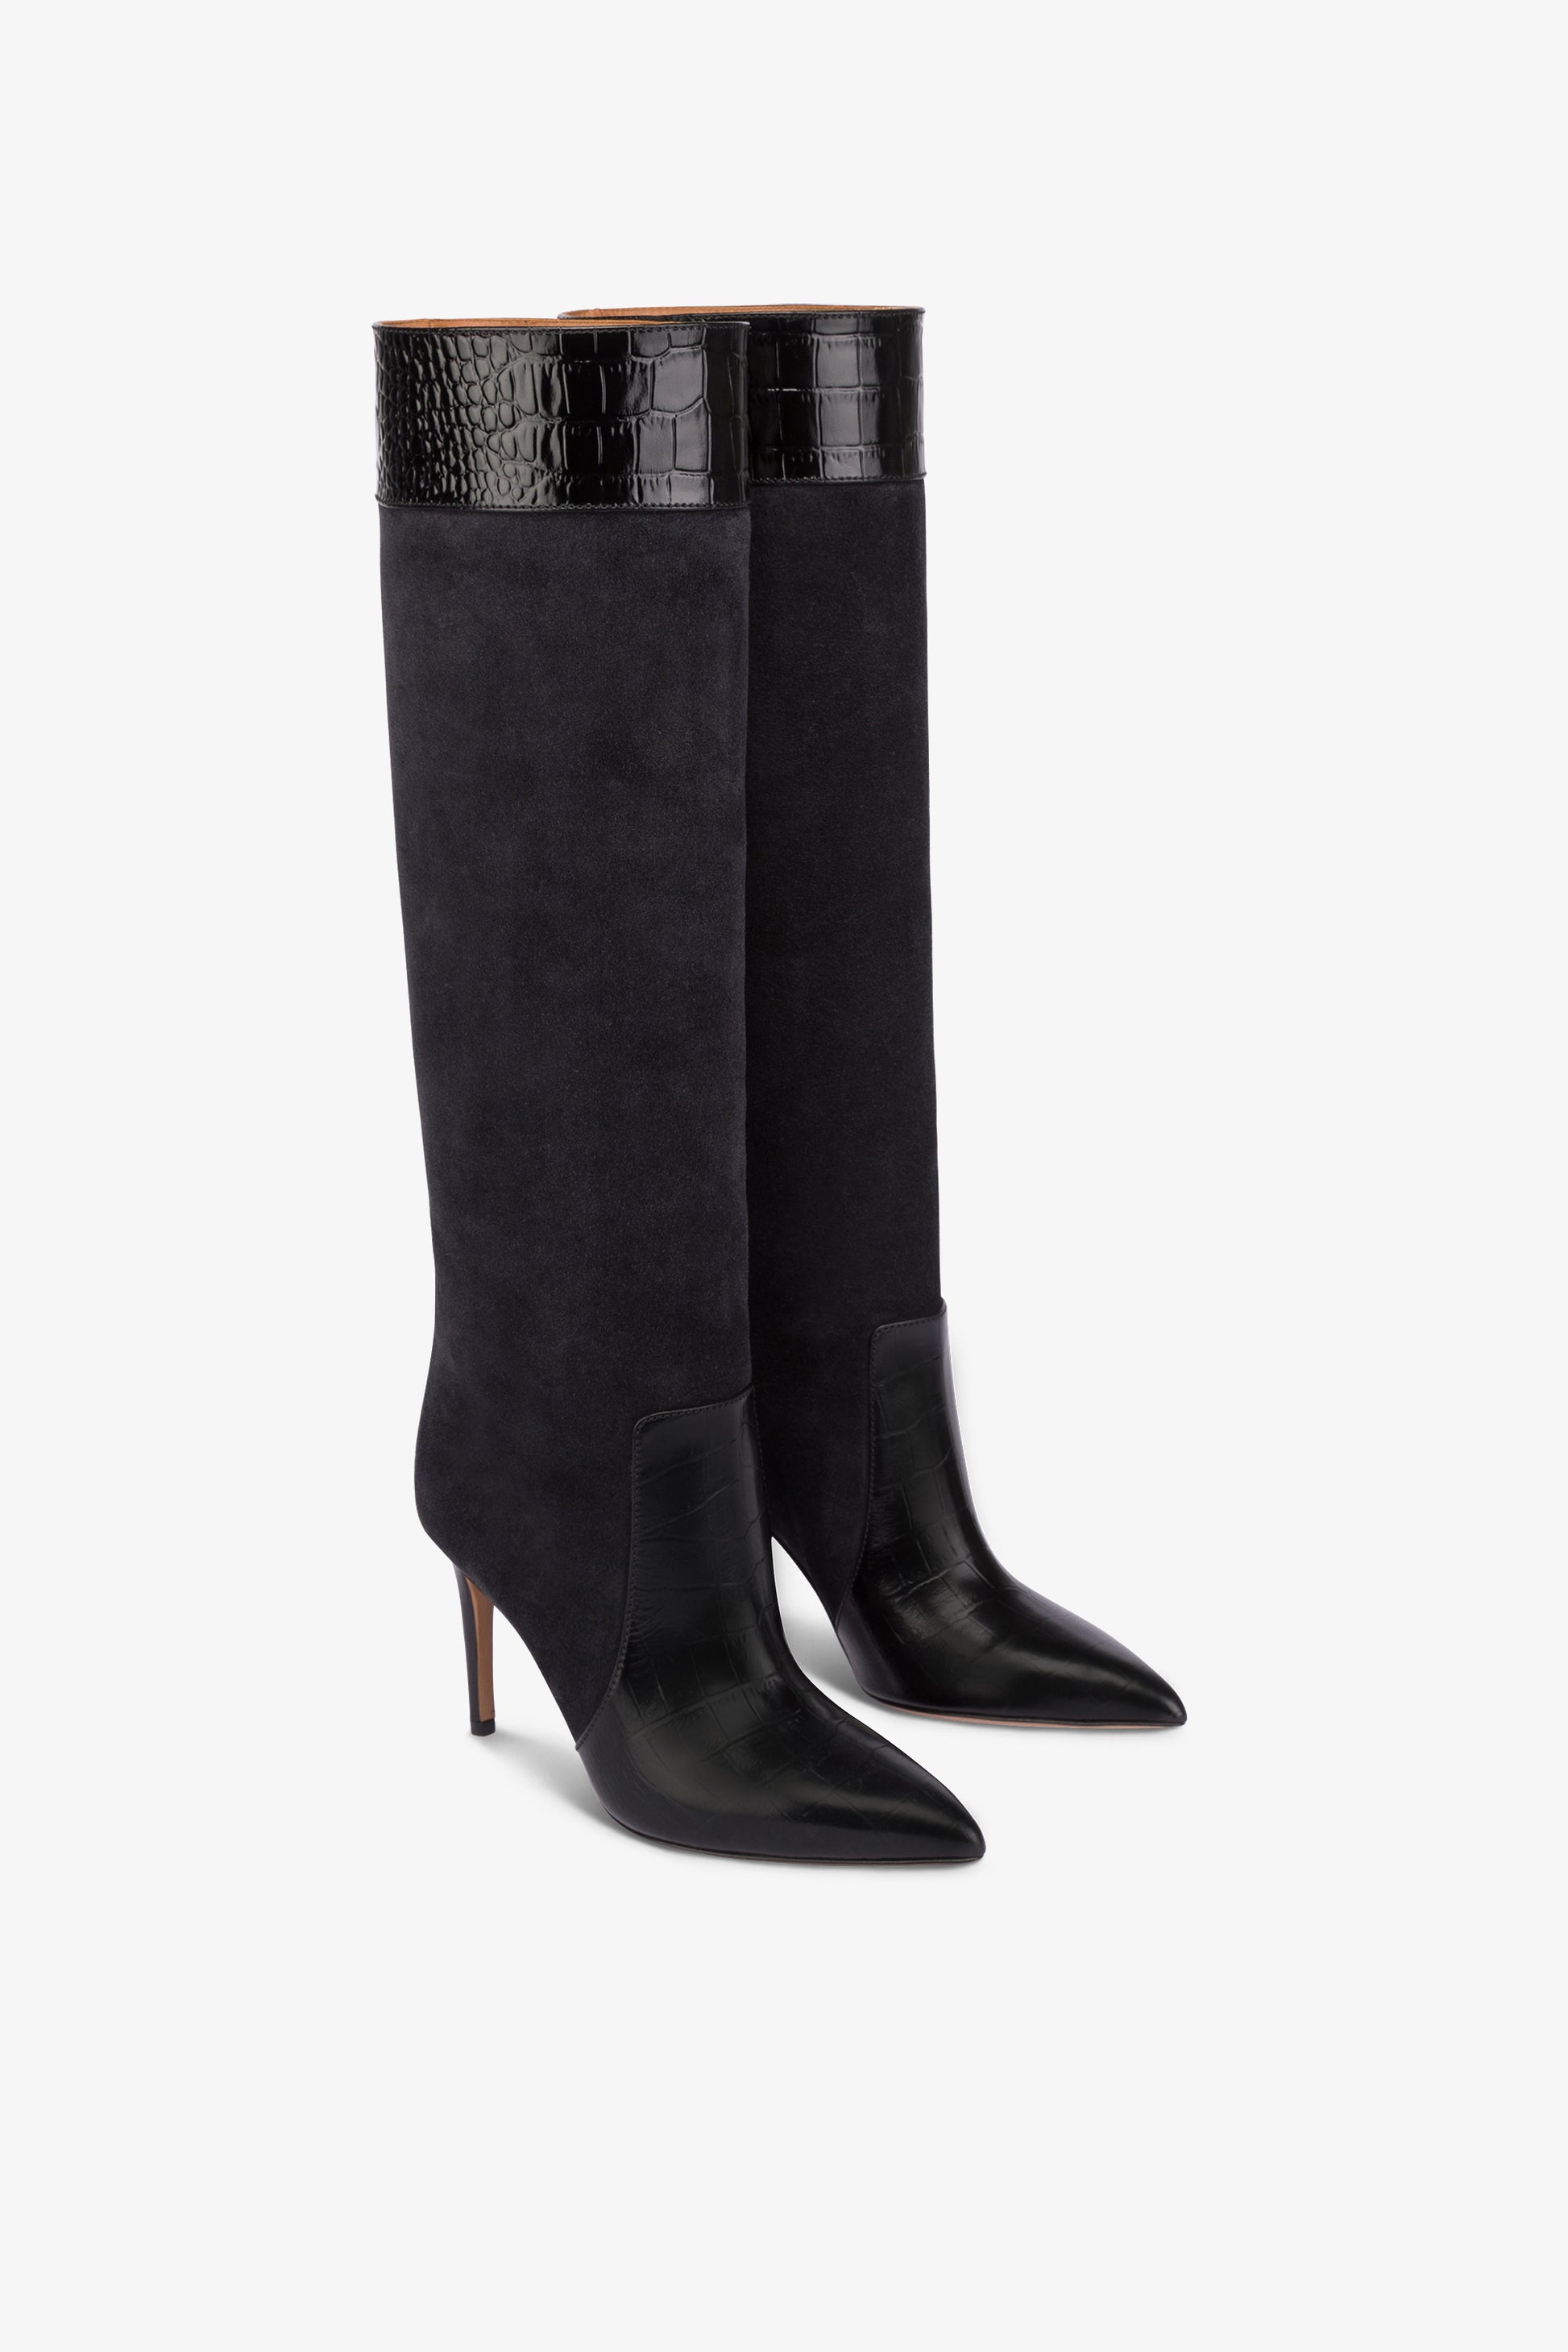 Long, pointed boots in black and off-black croco-embossed and suede